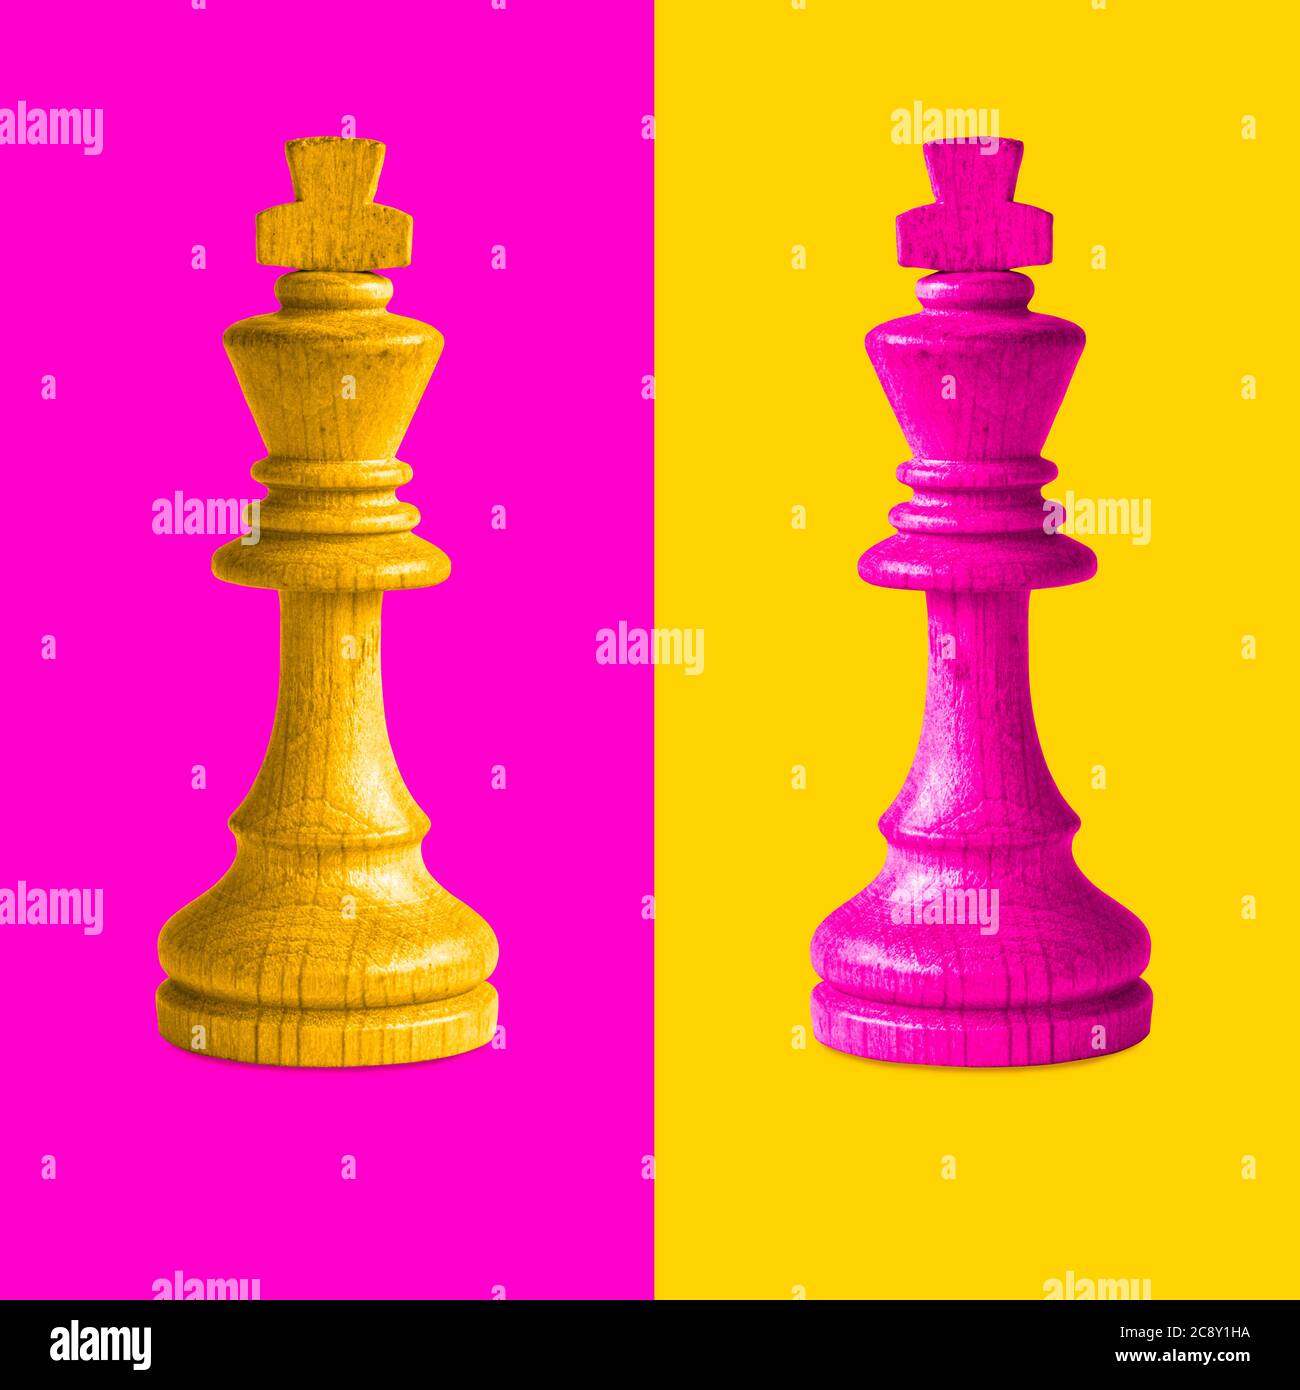 Pair of king chess pieces confronted as opposites in pink and yellow background. Stock Photo